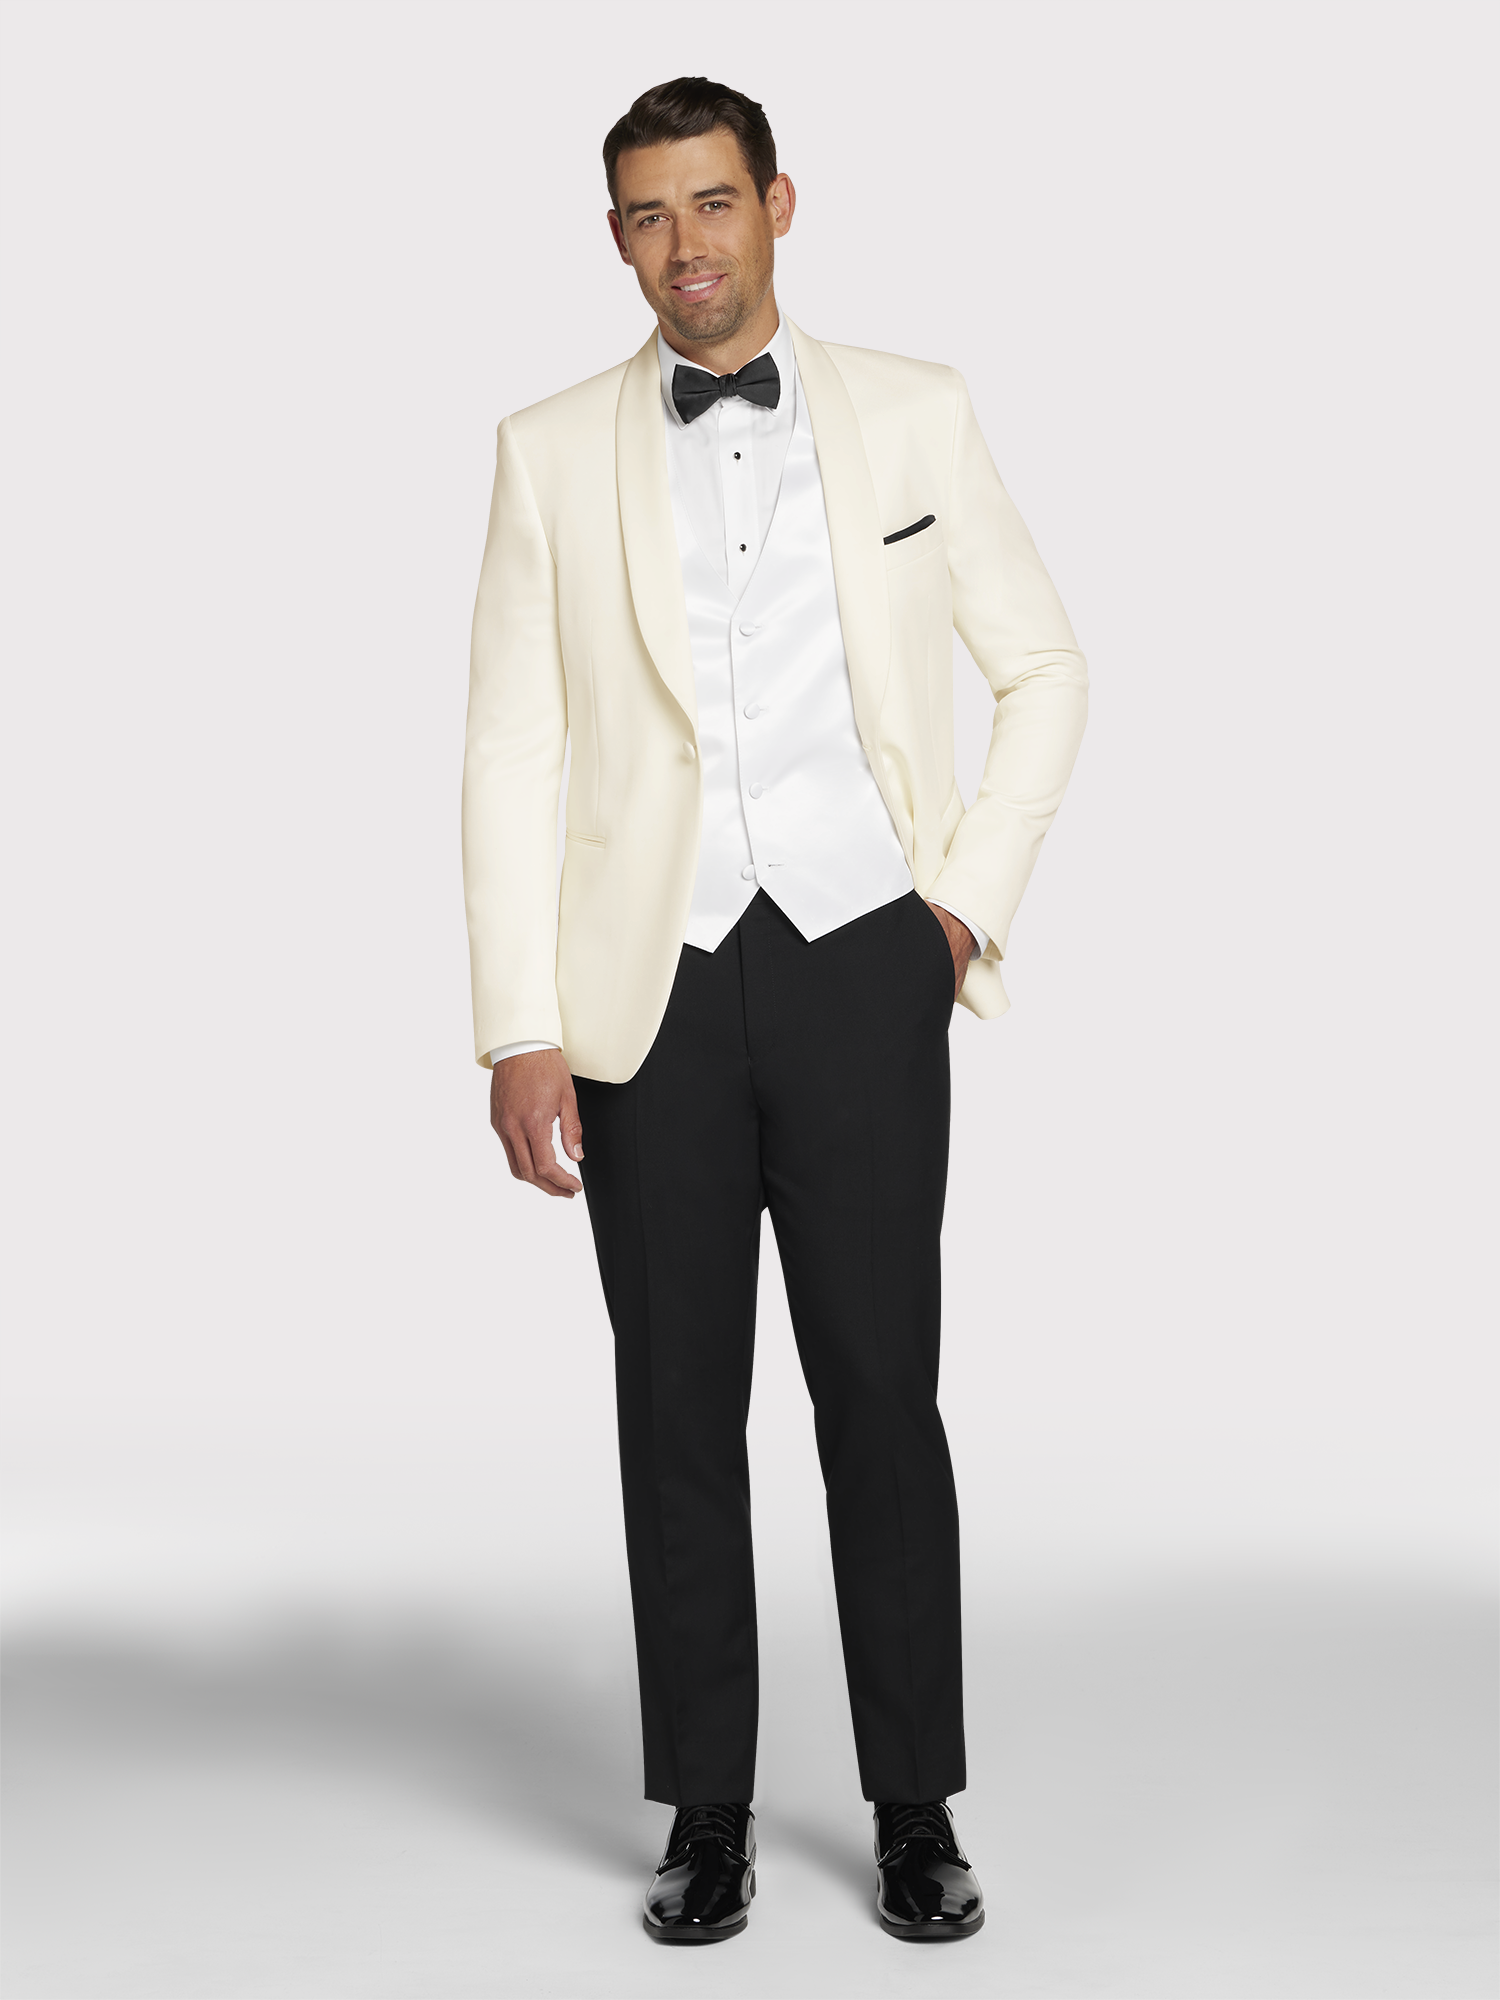 Tuxedo Styles for Special Occasions & Formal Events